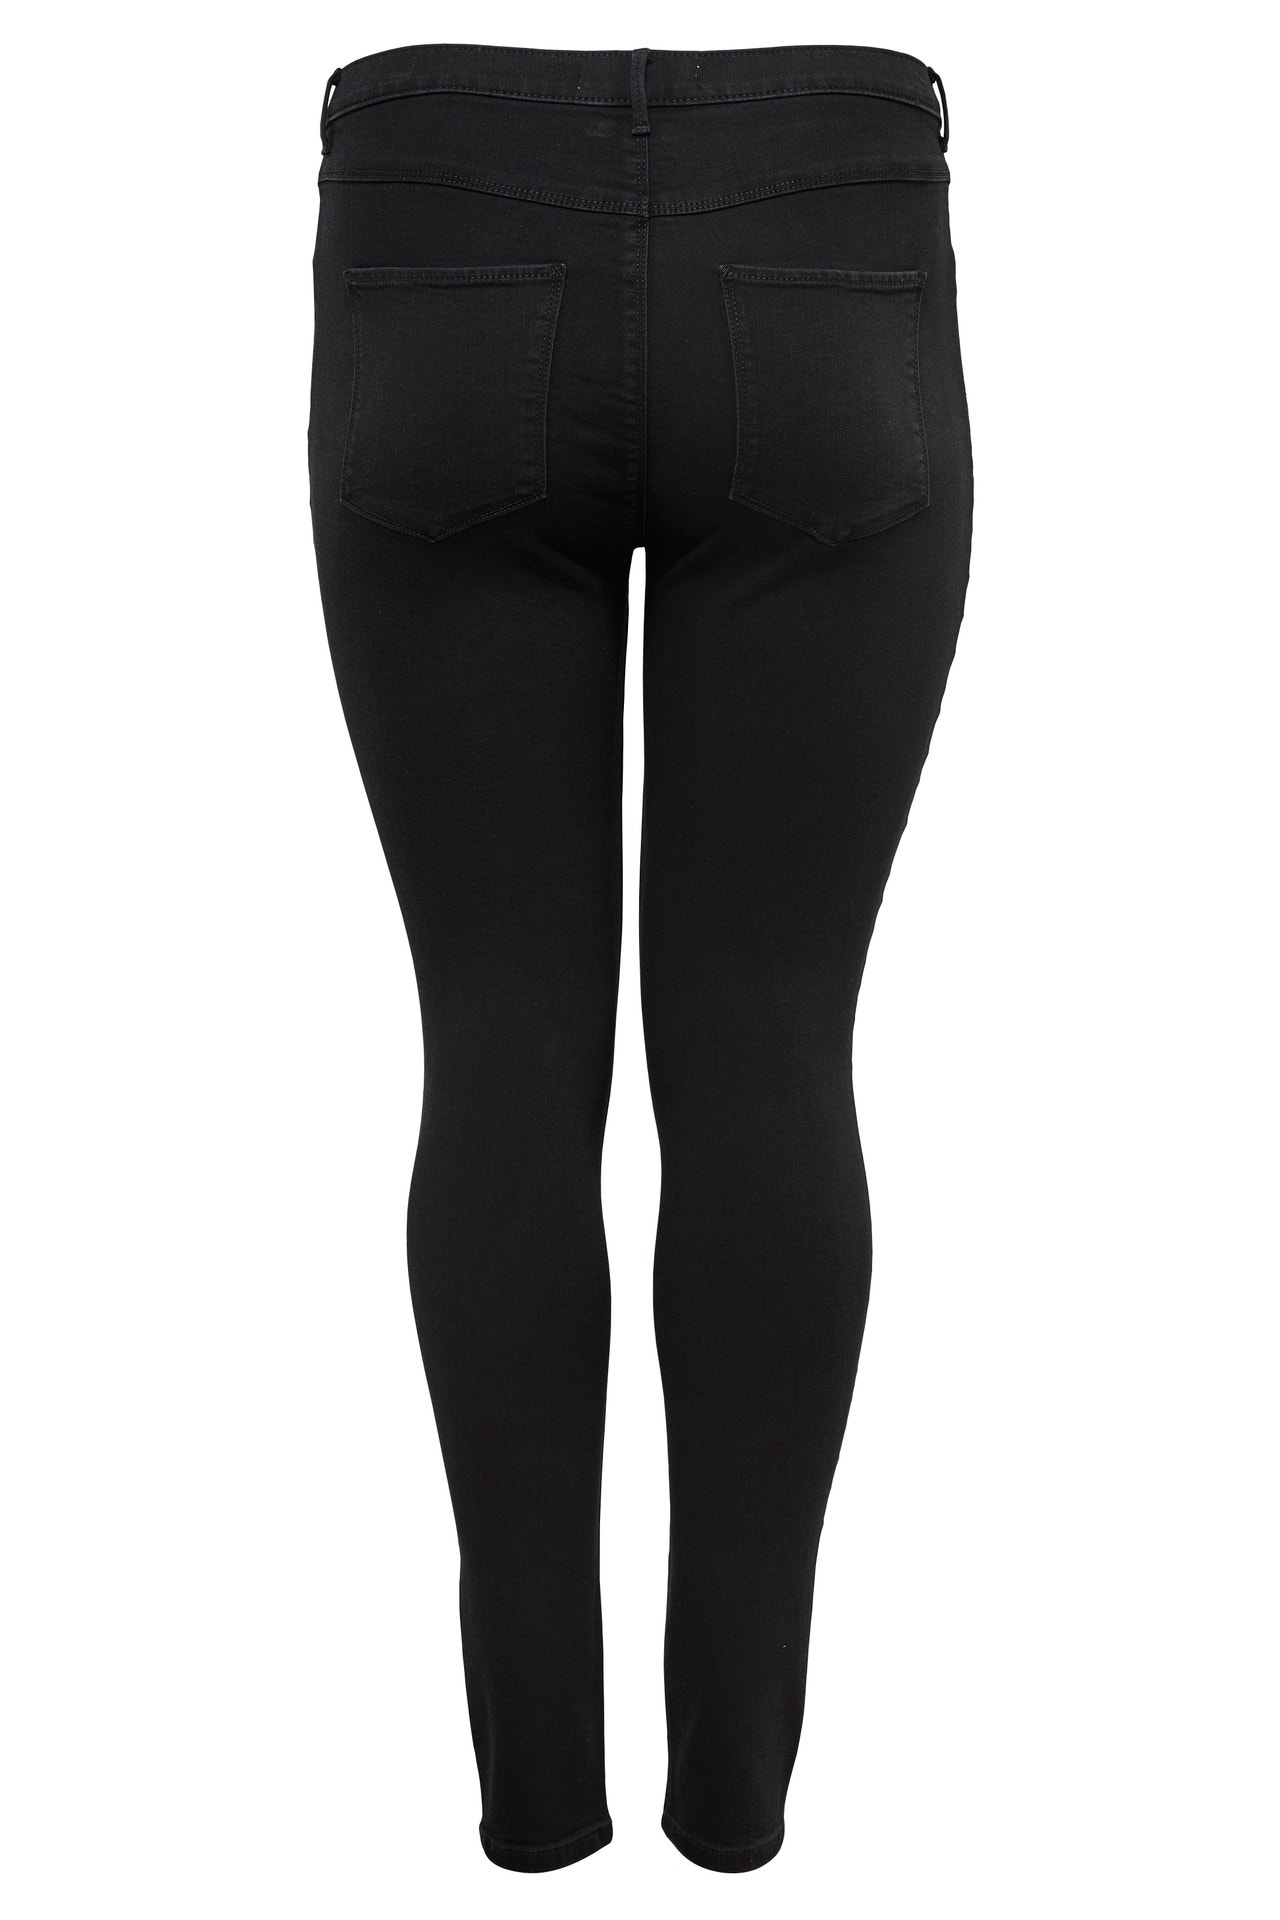 ONLY CARSTORM PUSH UP High Waist Skinny JEANS -Black - 15174946